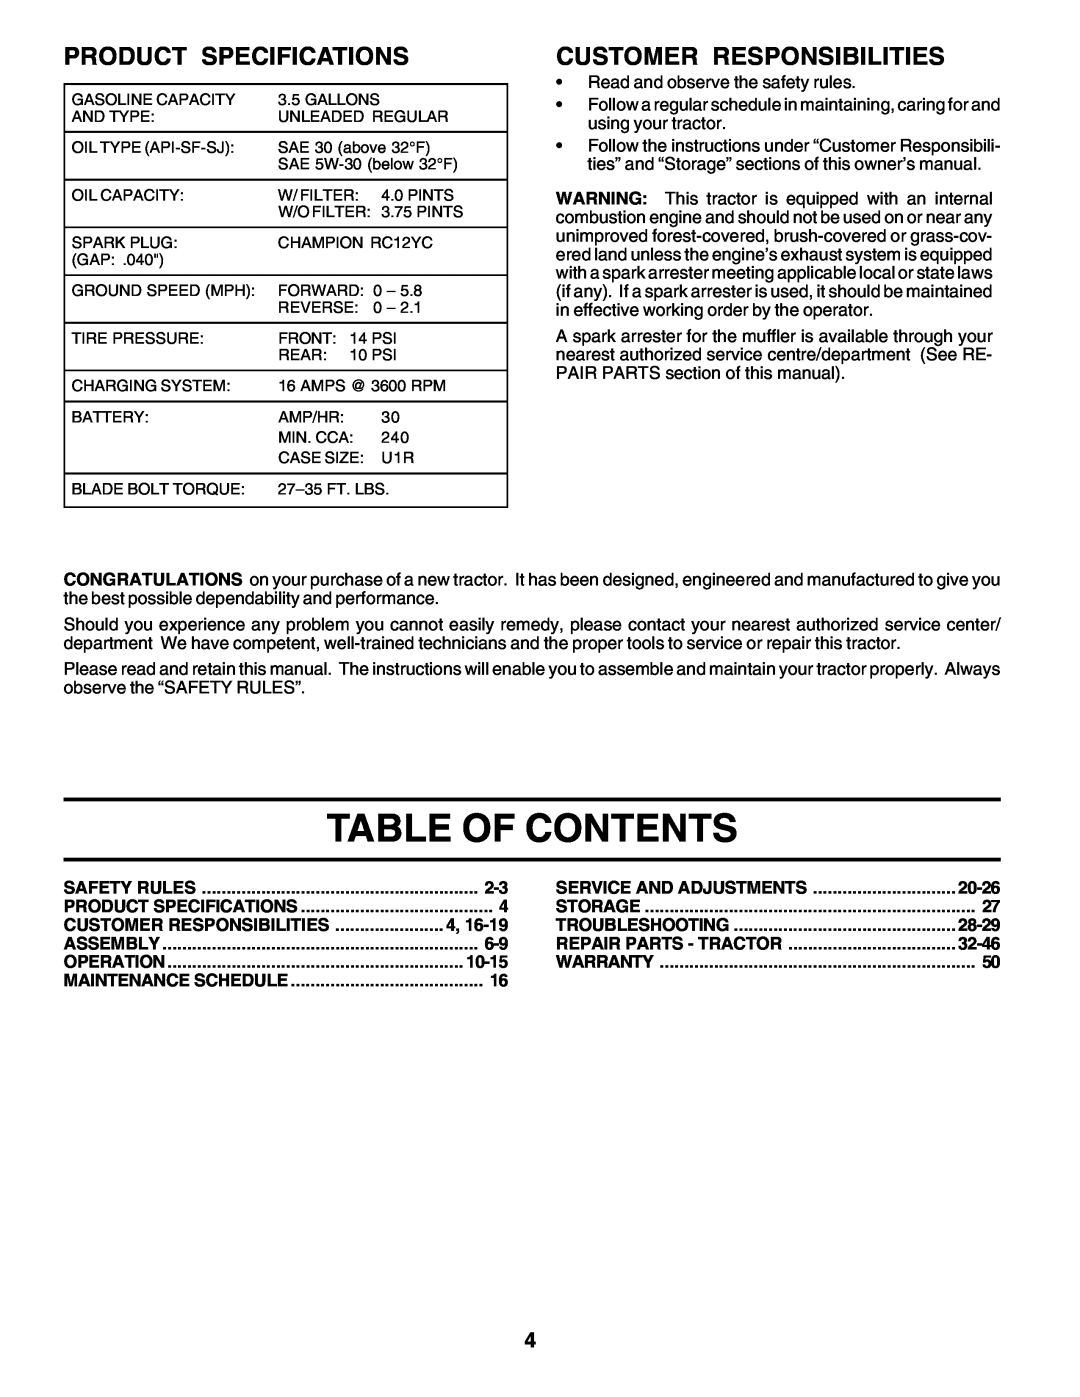 Poulan 178497 owner manual Table Of Contents, Product Specifications, Customer Responsibilities 